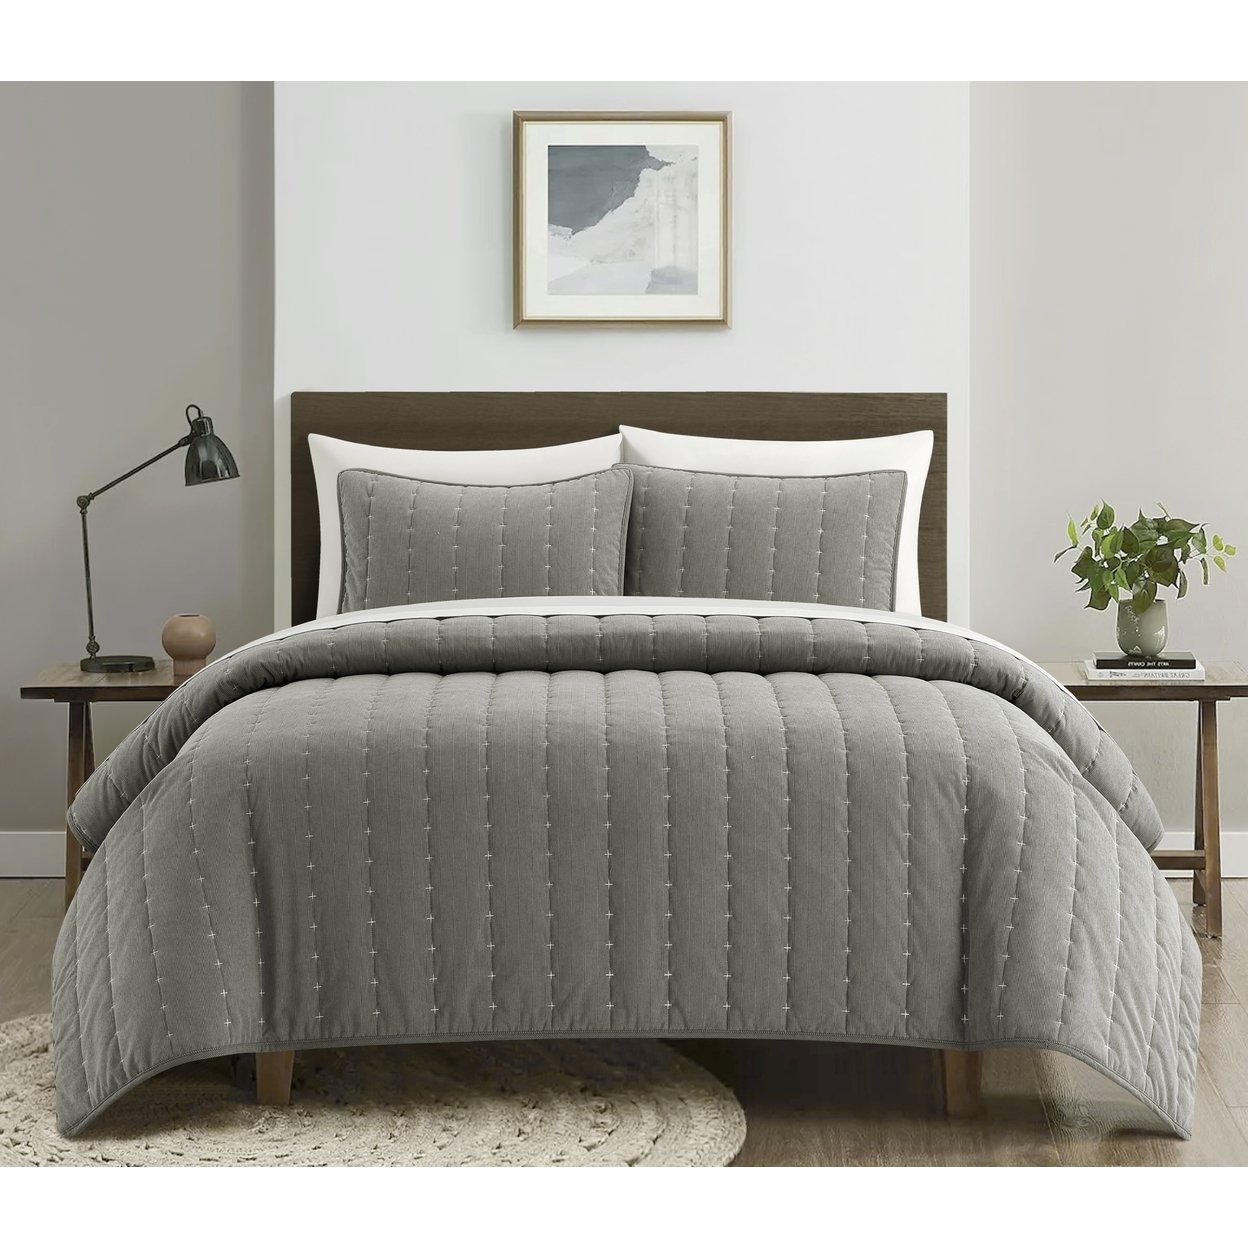 Chic Home Vala 3 Piece Quilt Set Corduroy Fabric Bedspread with Channel Quilted Embroidery Details Pattern